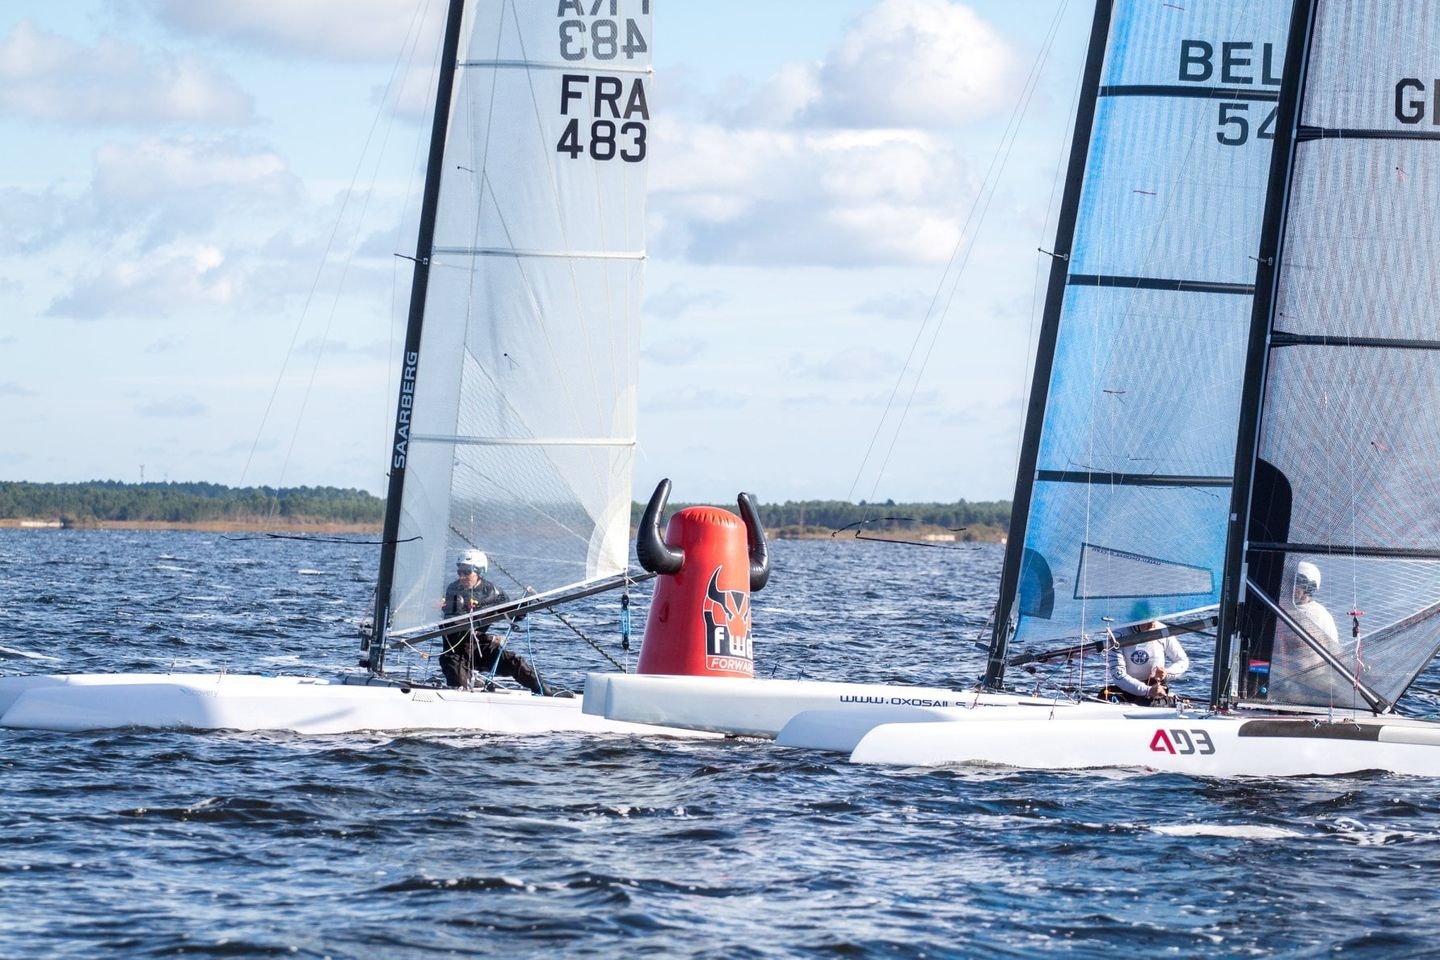  ACat  French Championship 2021  Maubuisson FRA  Final results